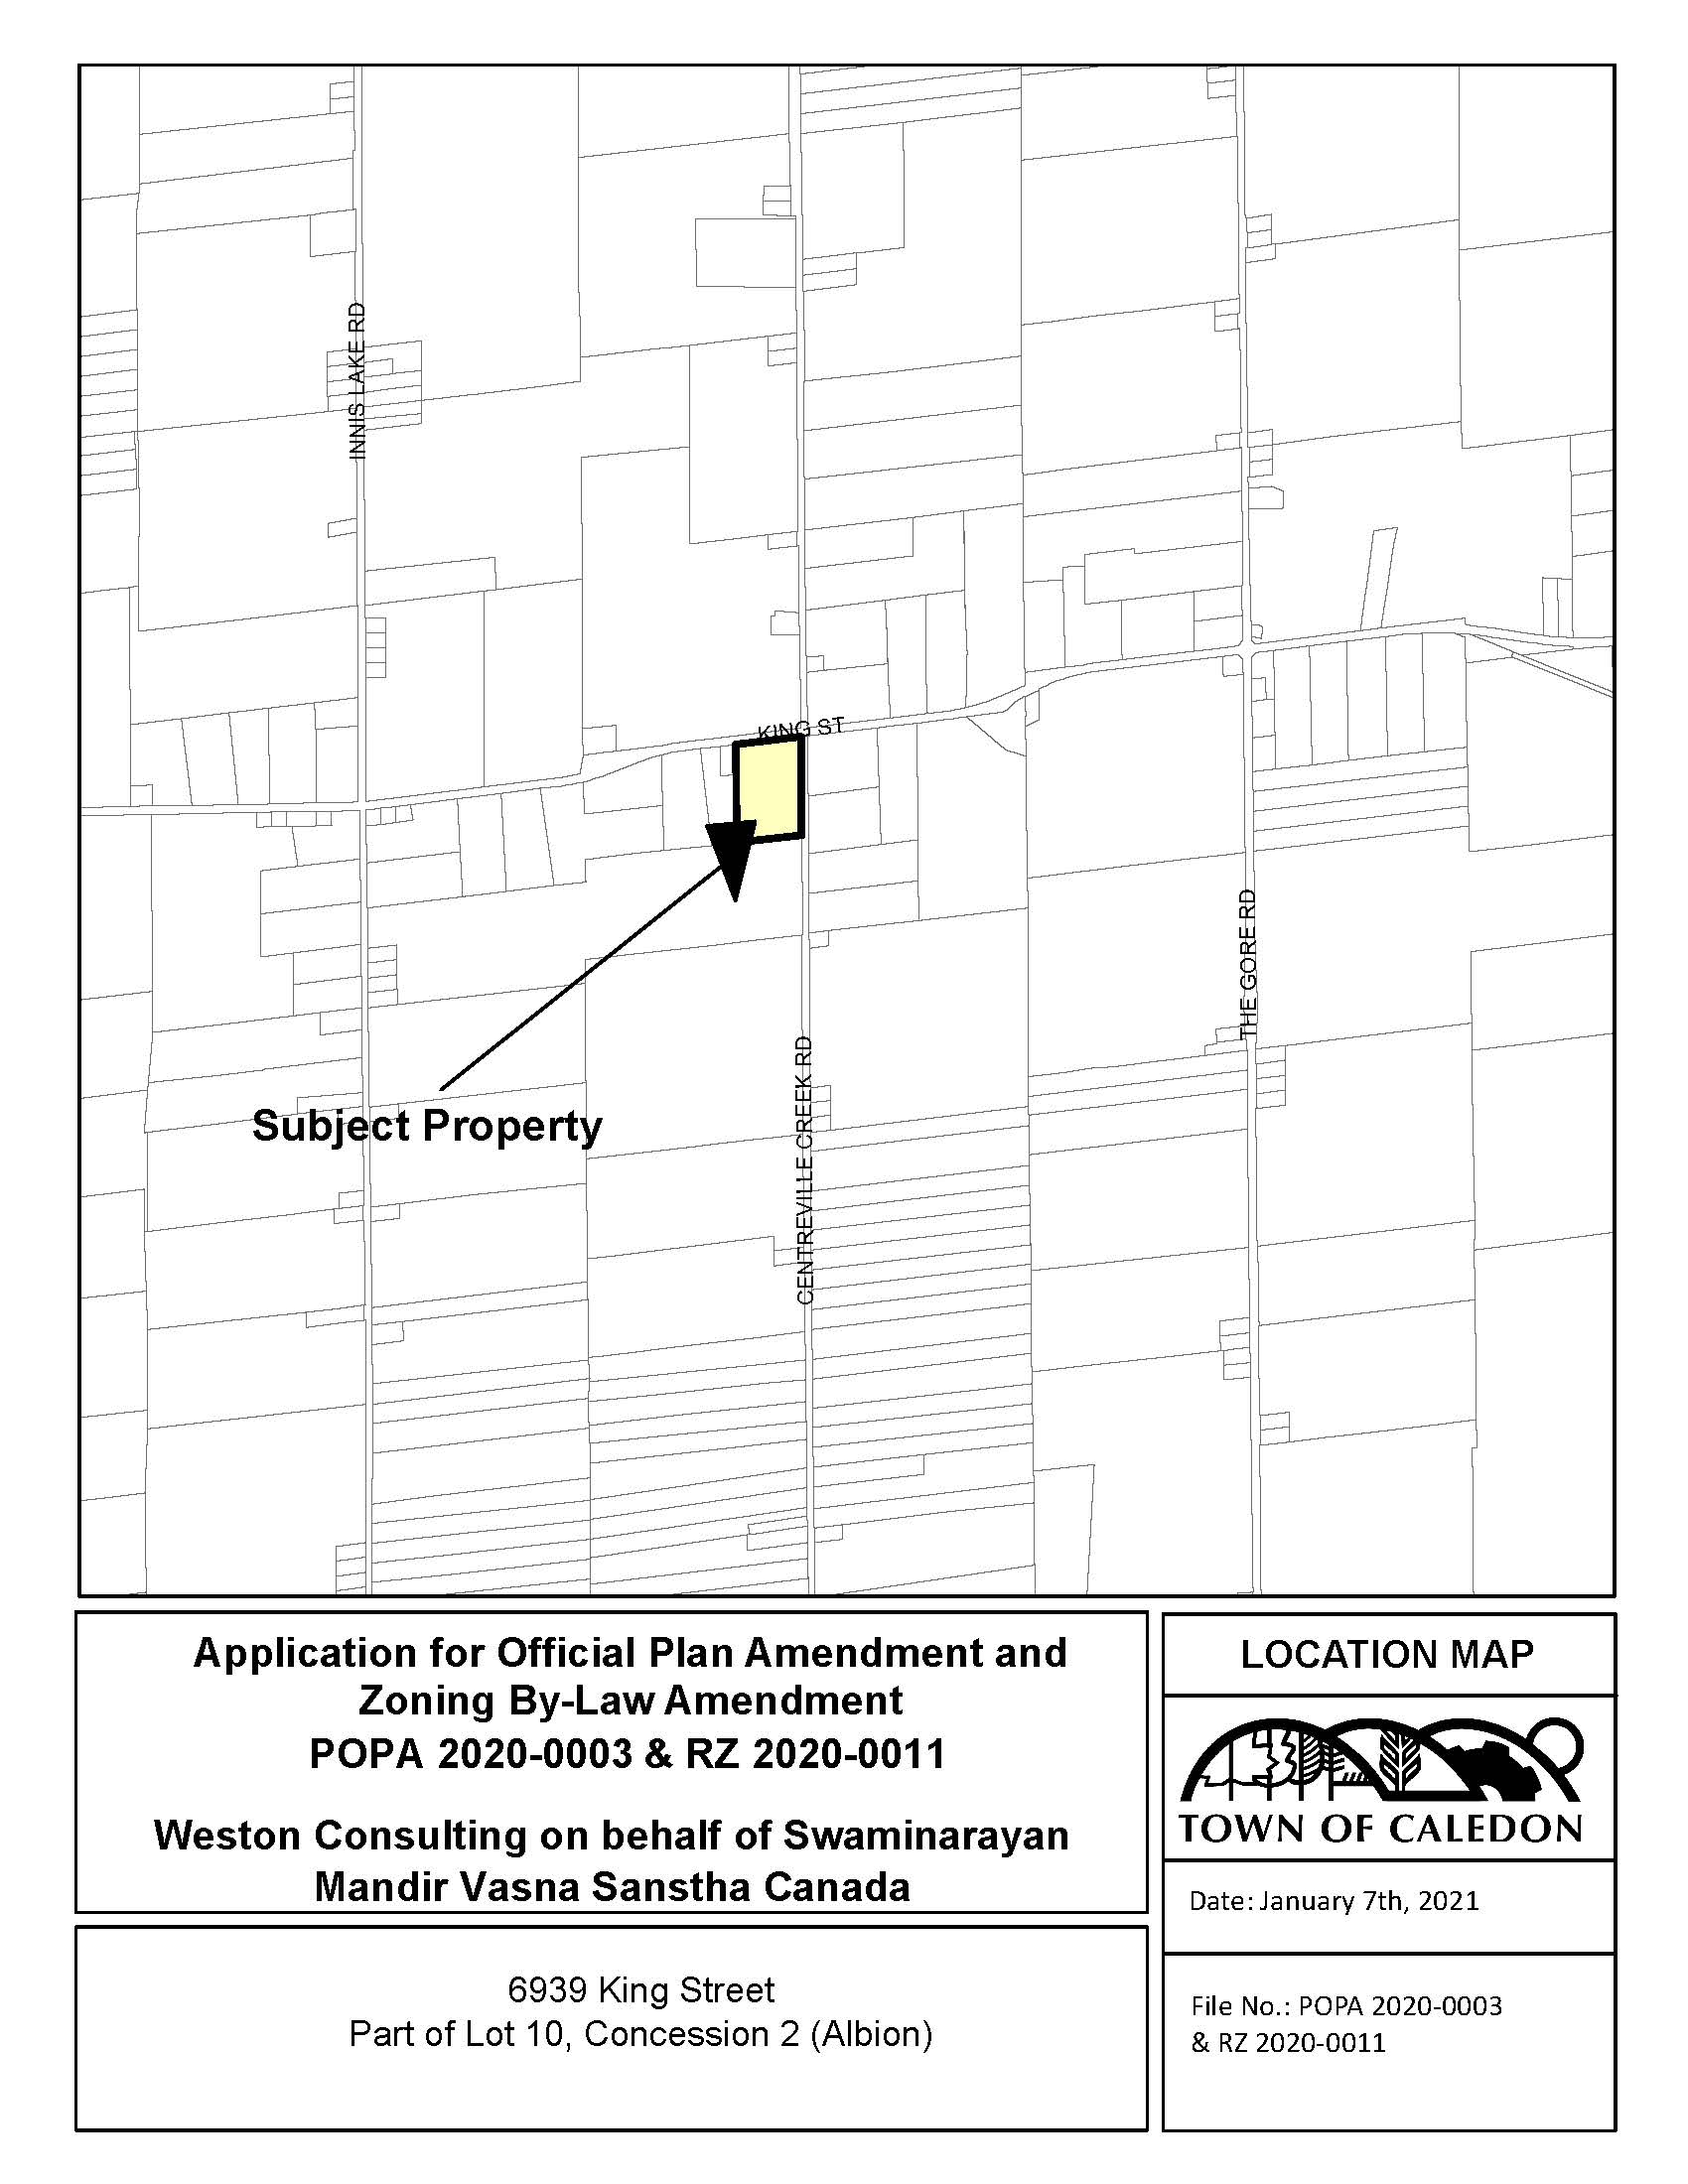 Map of Subject Property at 6939 King Street